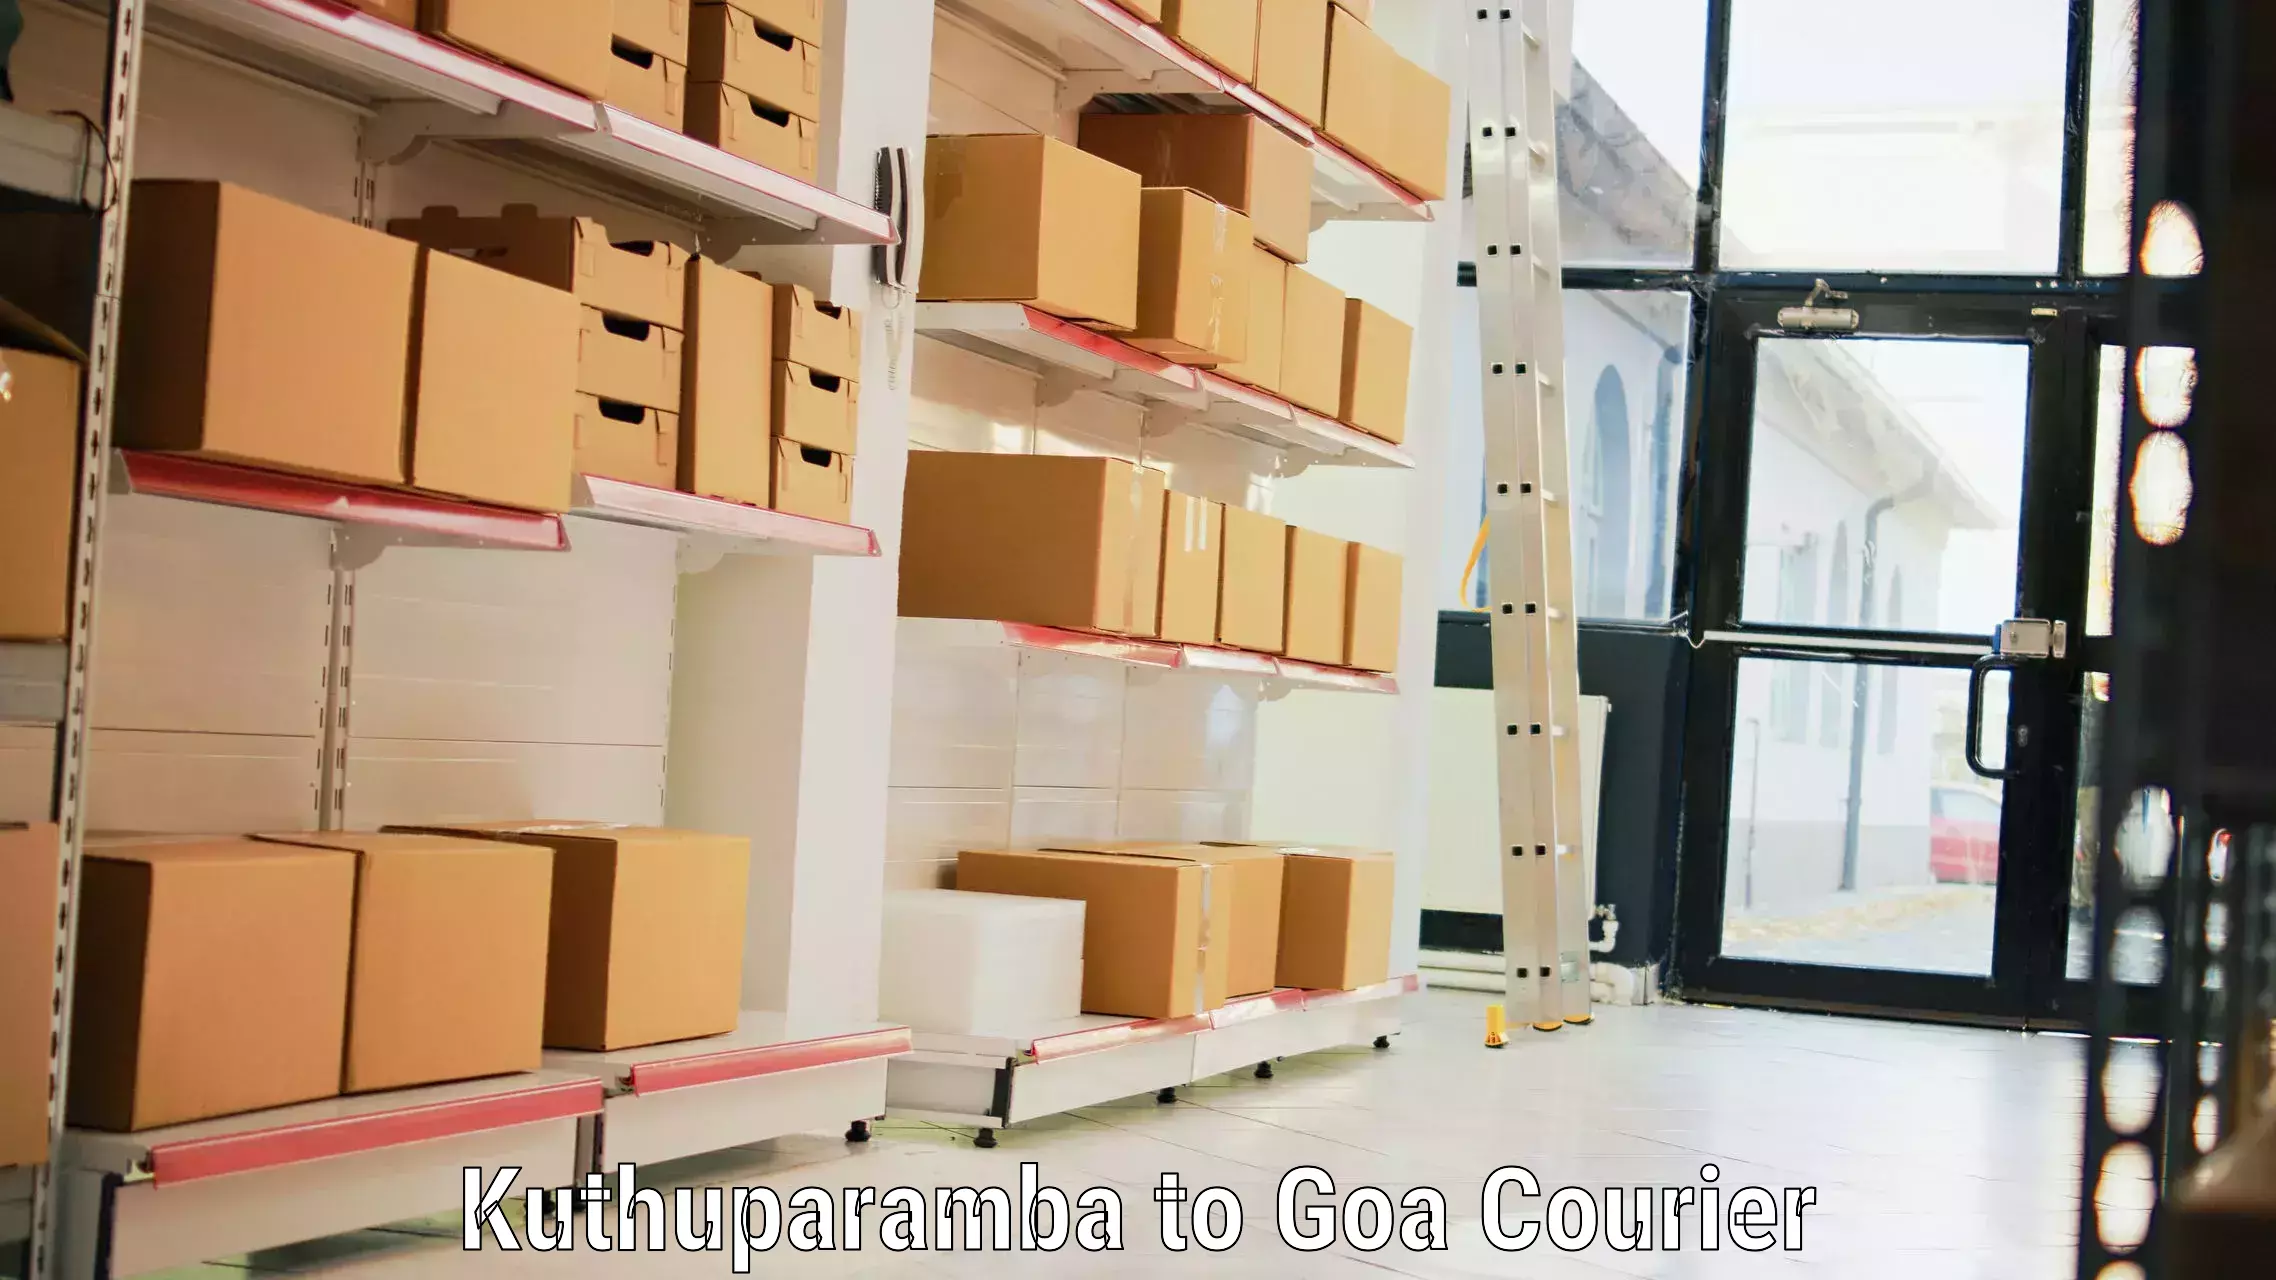 Instant baggage transport quote Kuthuparamba to Goa